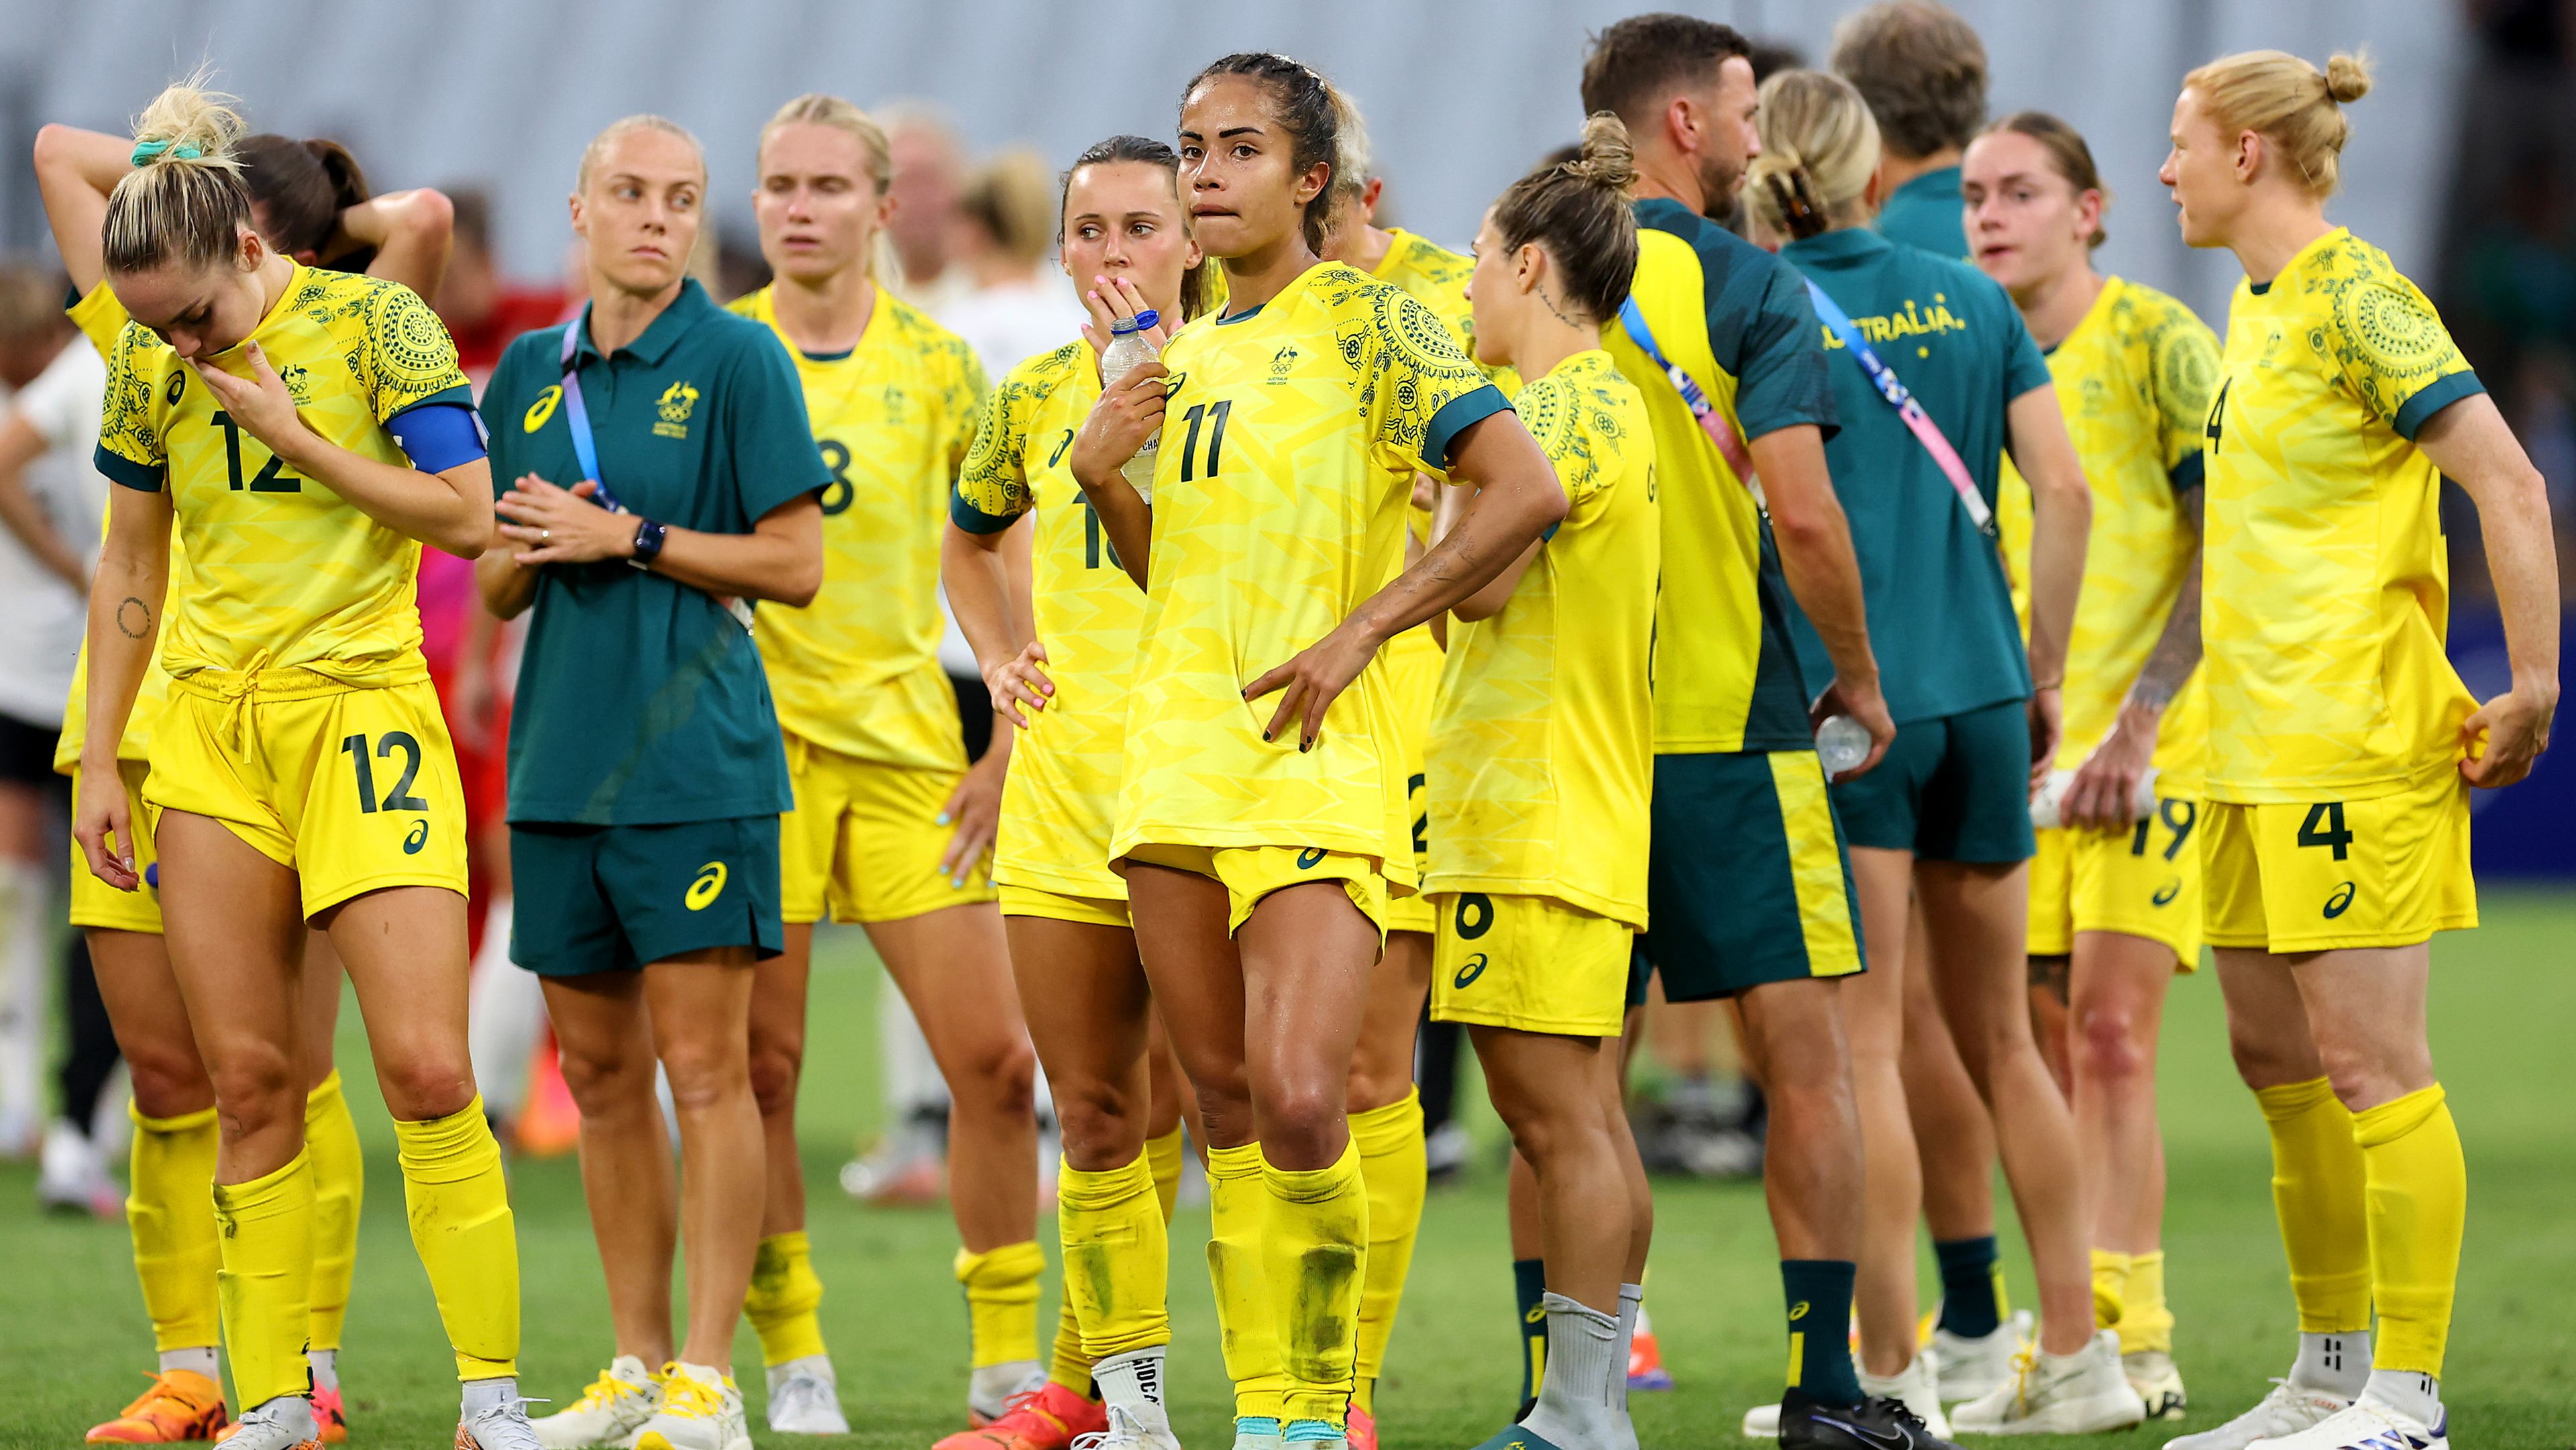 Players from Team Australia (Matildas) show dejection after losing to Germany.